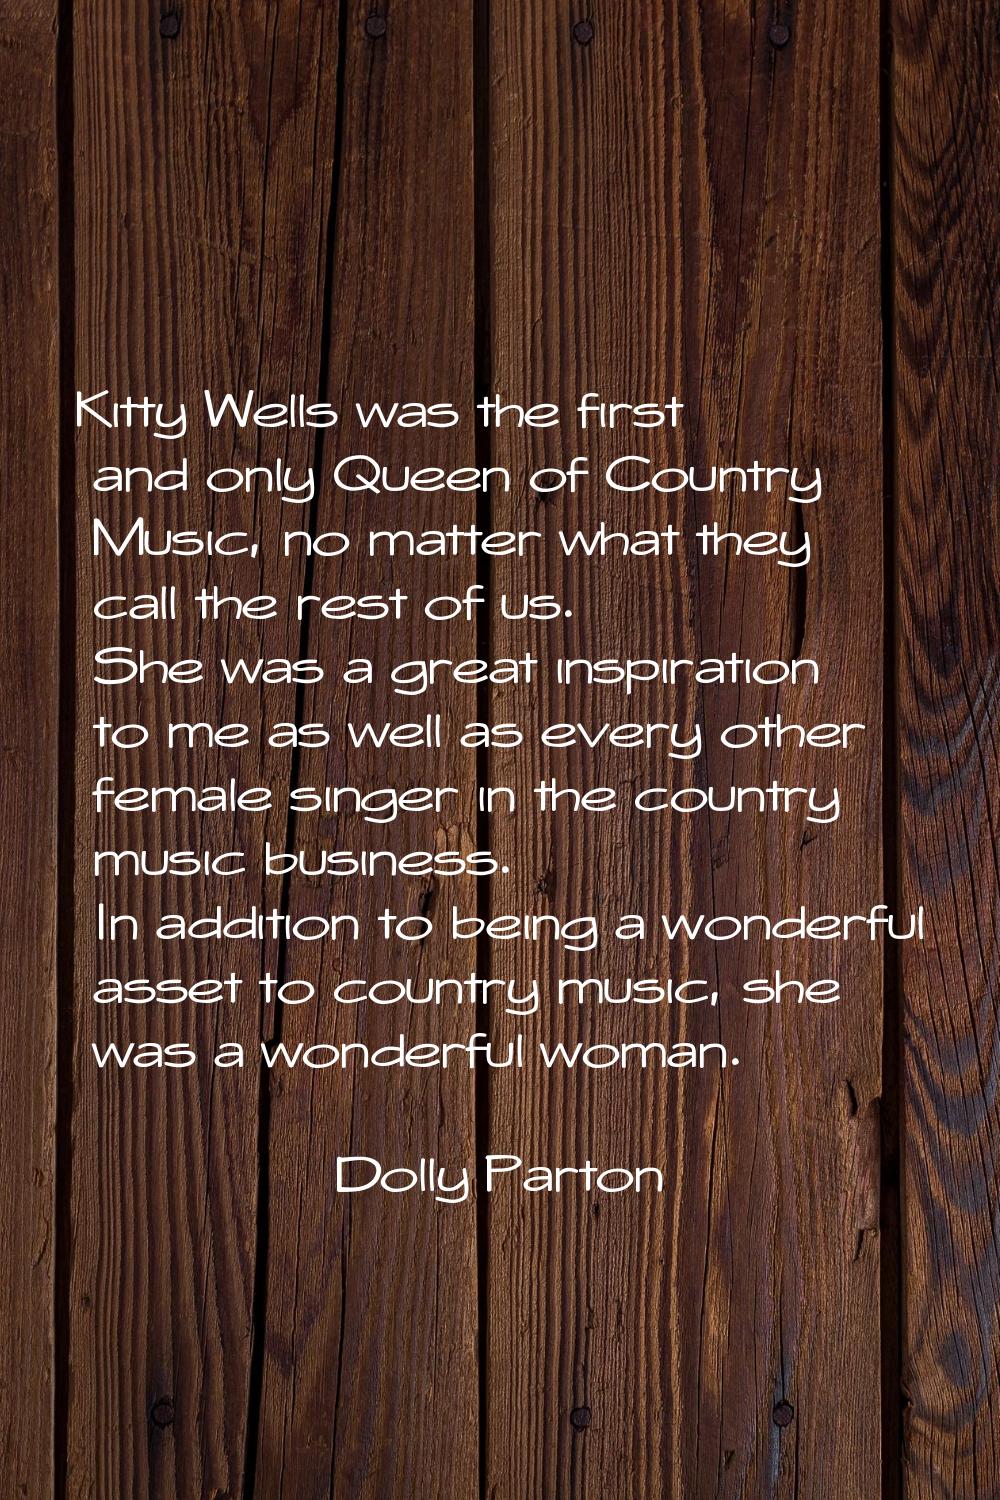 Kitty Wells was the first and only Queen of Country Music, no matter what they call the rest of us.